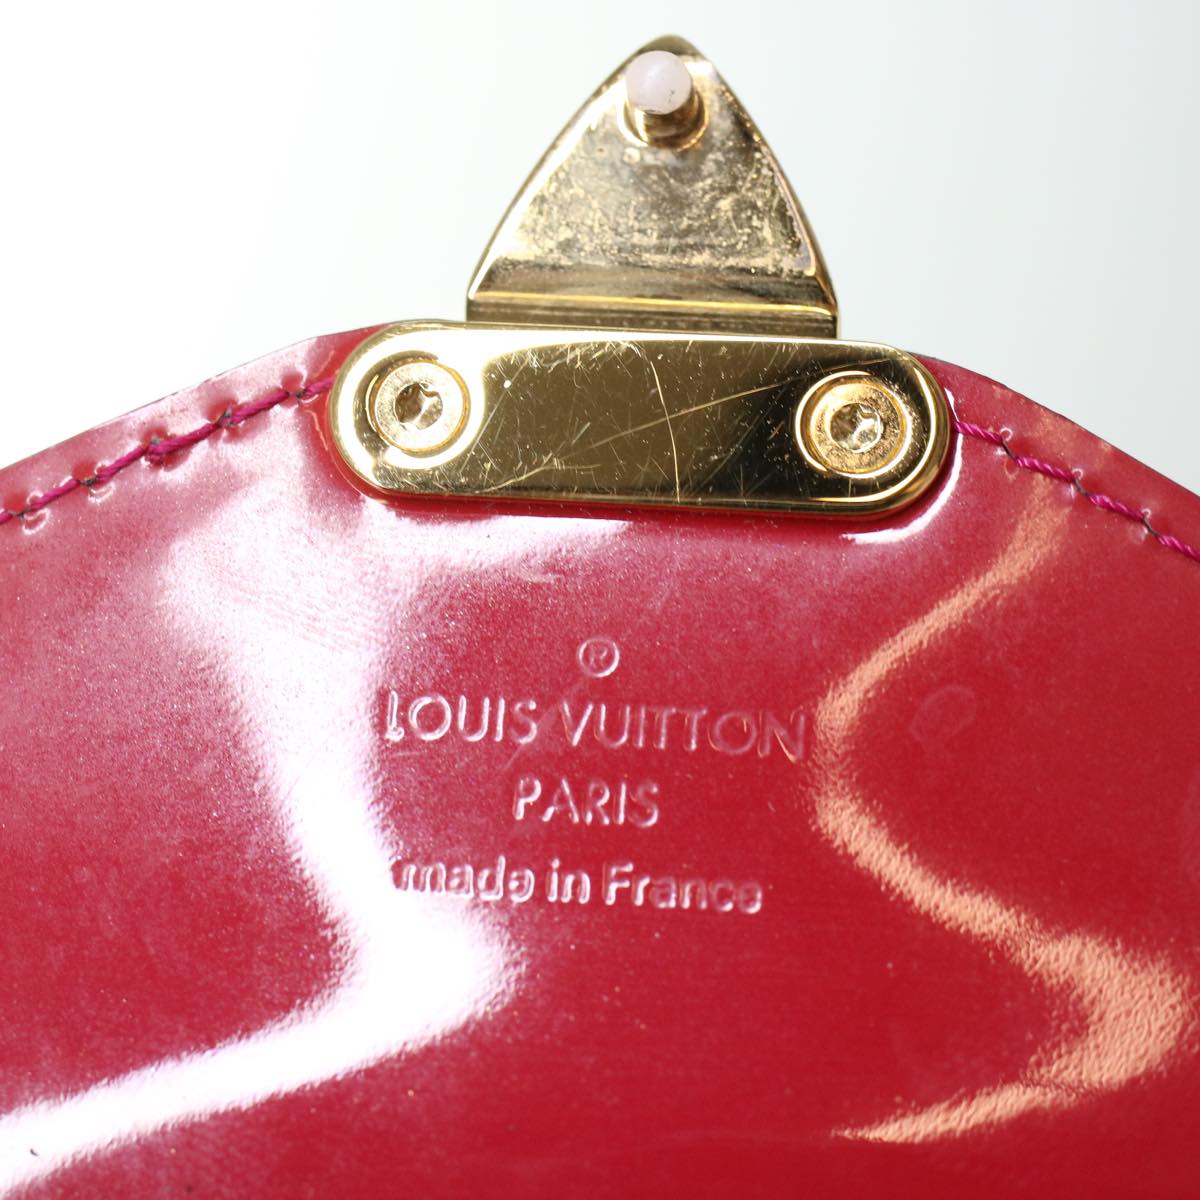 LOUIS VUITTON Vernis Monceau BB Hand Bag 2way Red M91579 LV Auth bs5940